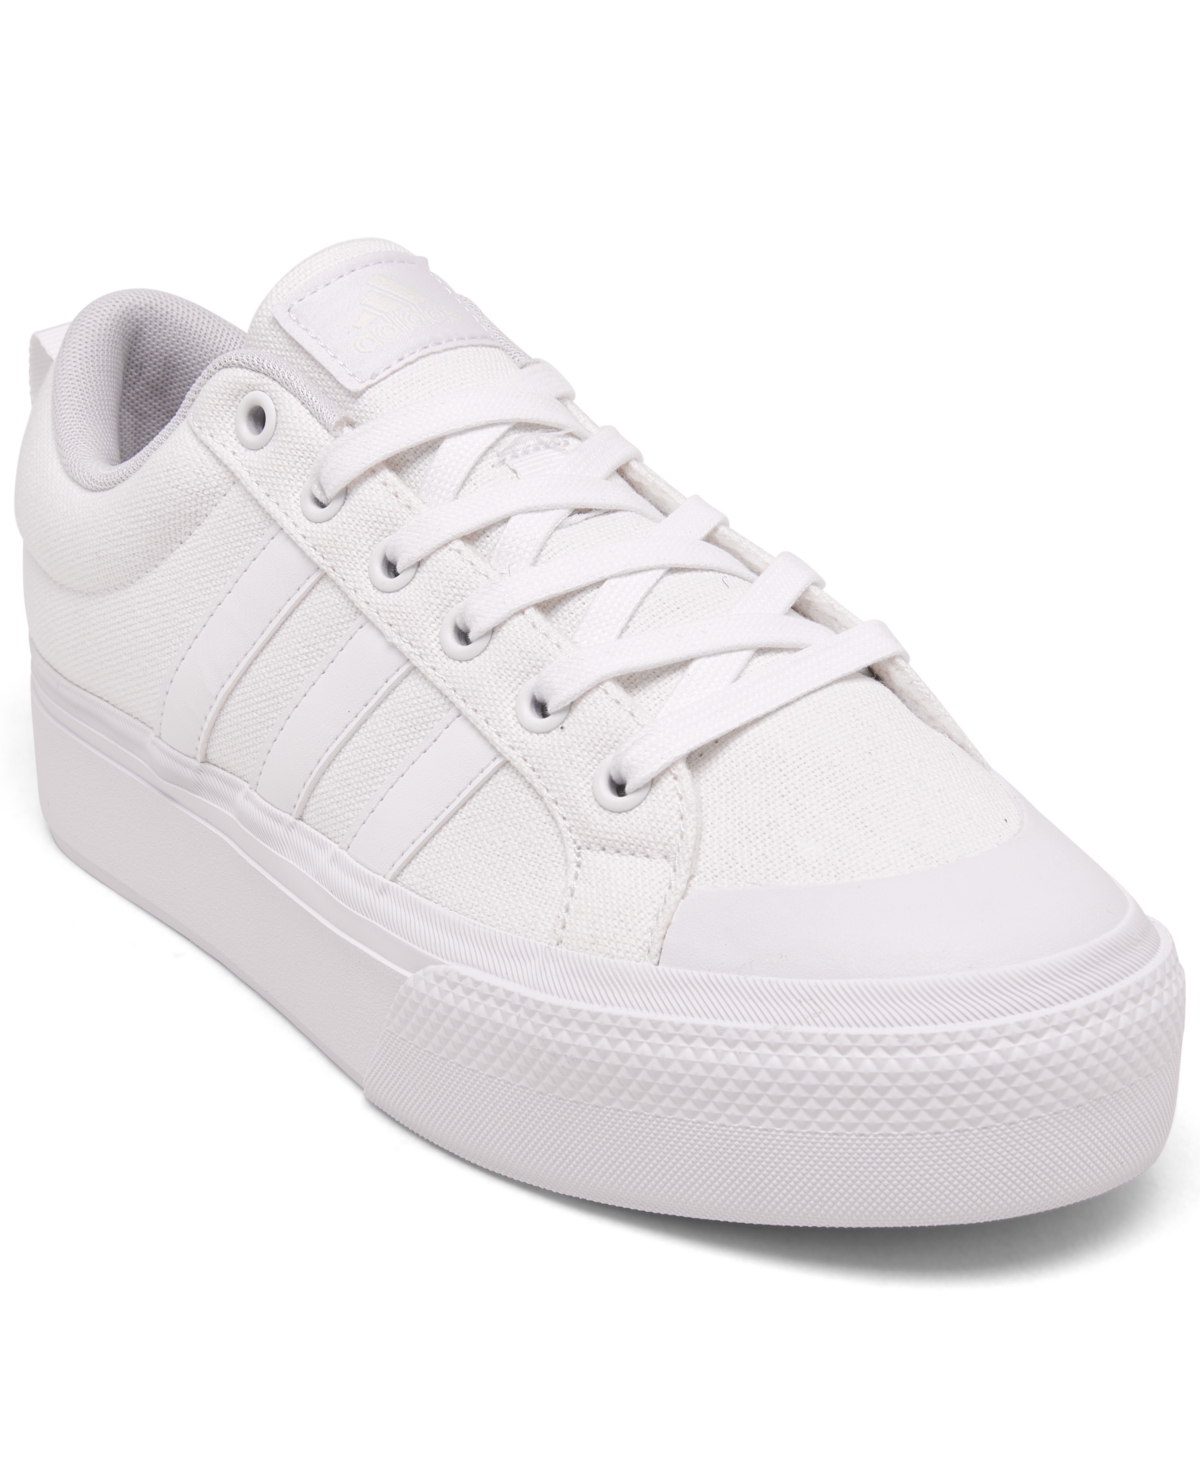 Adidas Originals Women's Bravada 2.0 Platform Casual Sneakers From Finish Line In Cloud White